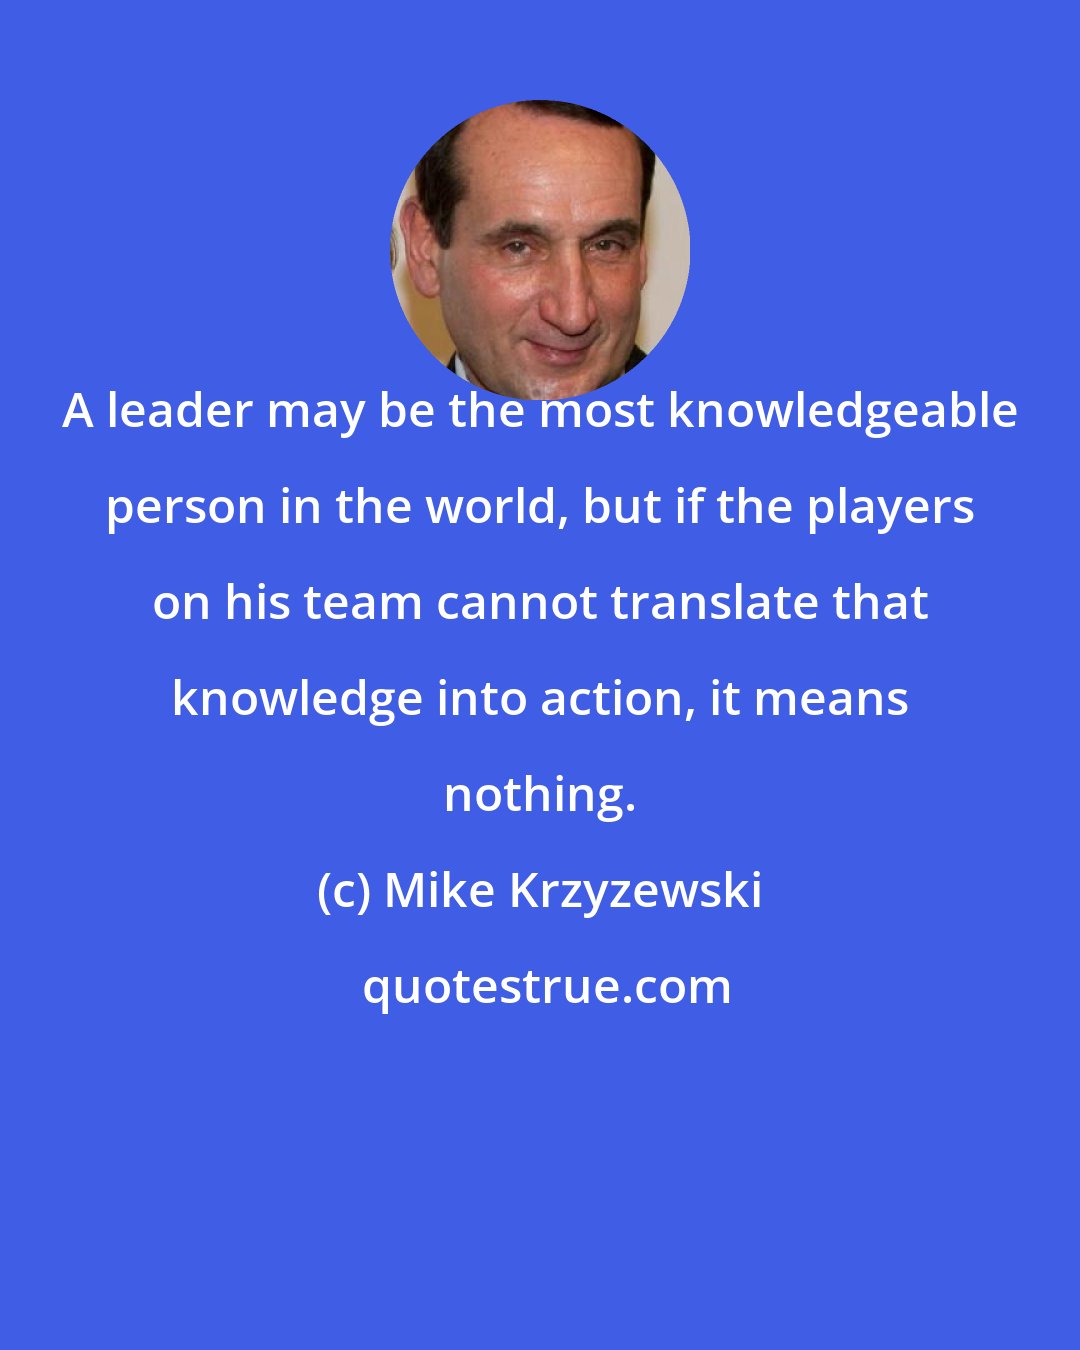 Mike Krzyzewski: A leader may be the most knowledgeable person in the world, but if the players on his team cannot translate that knowledge into action, it means nothing.